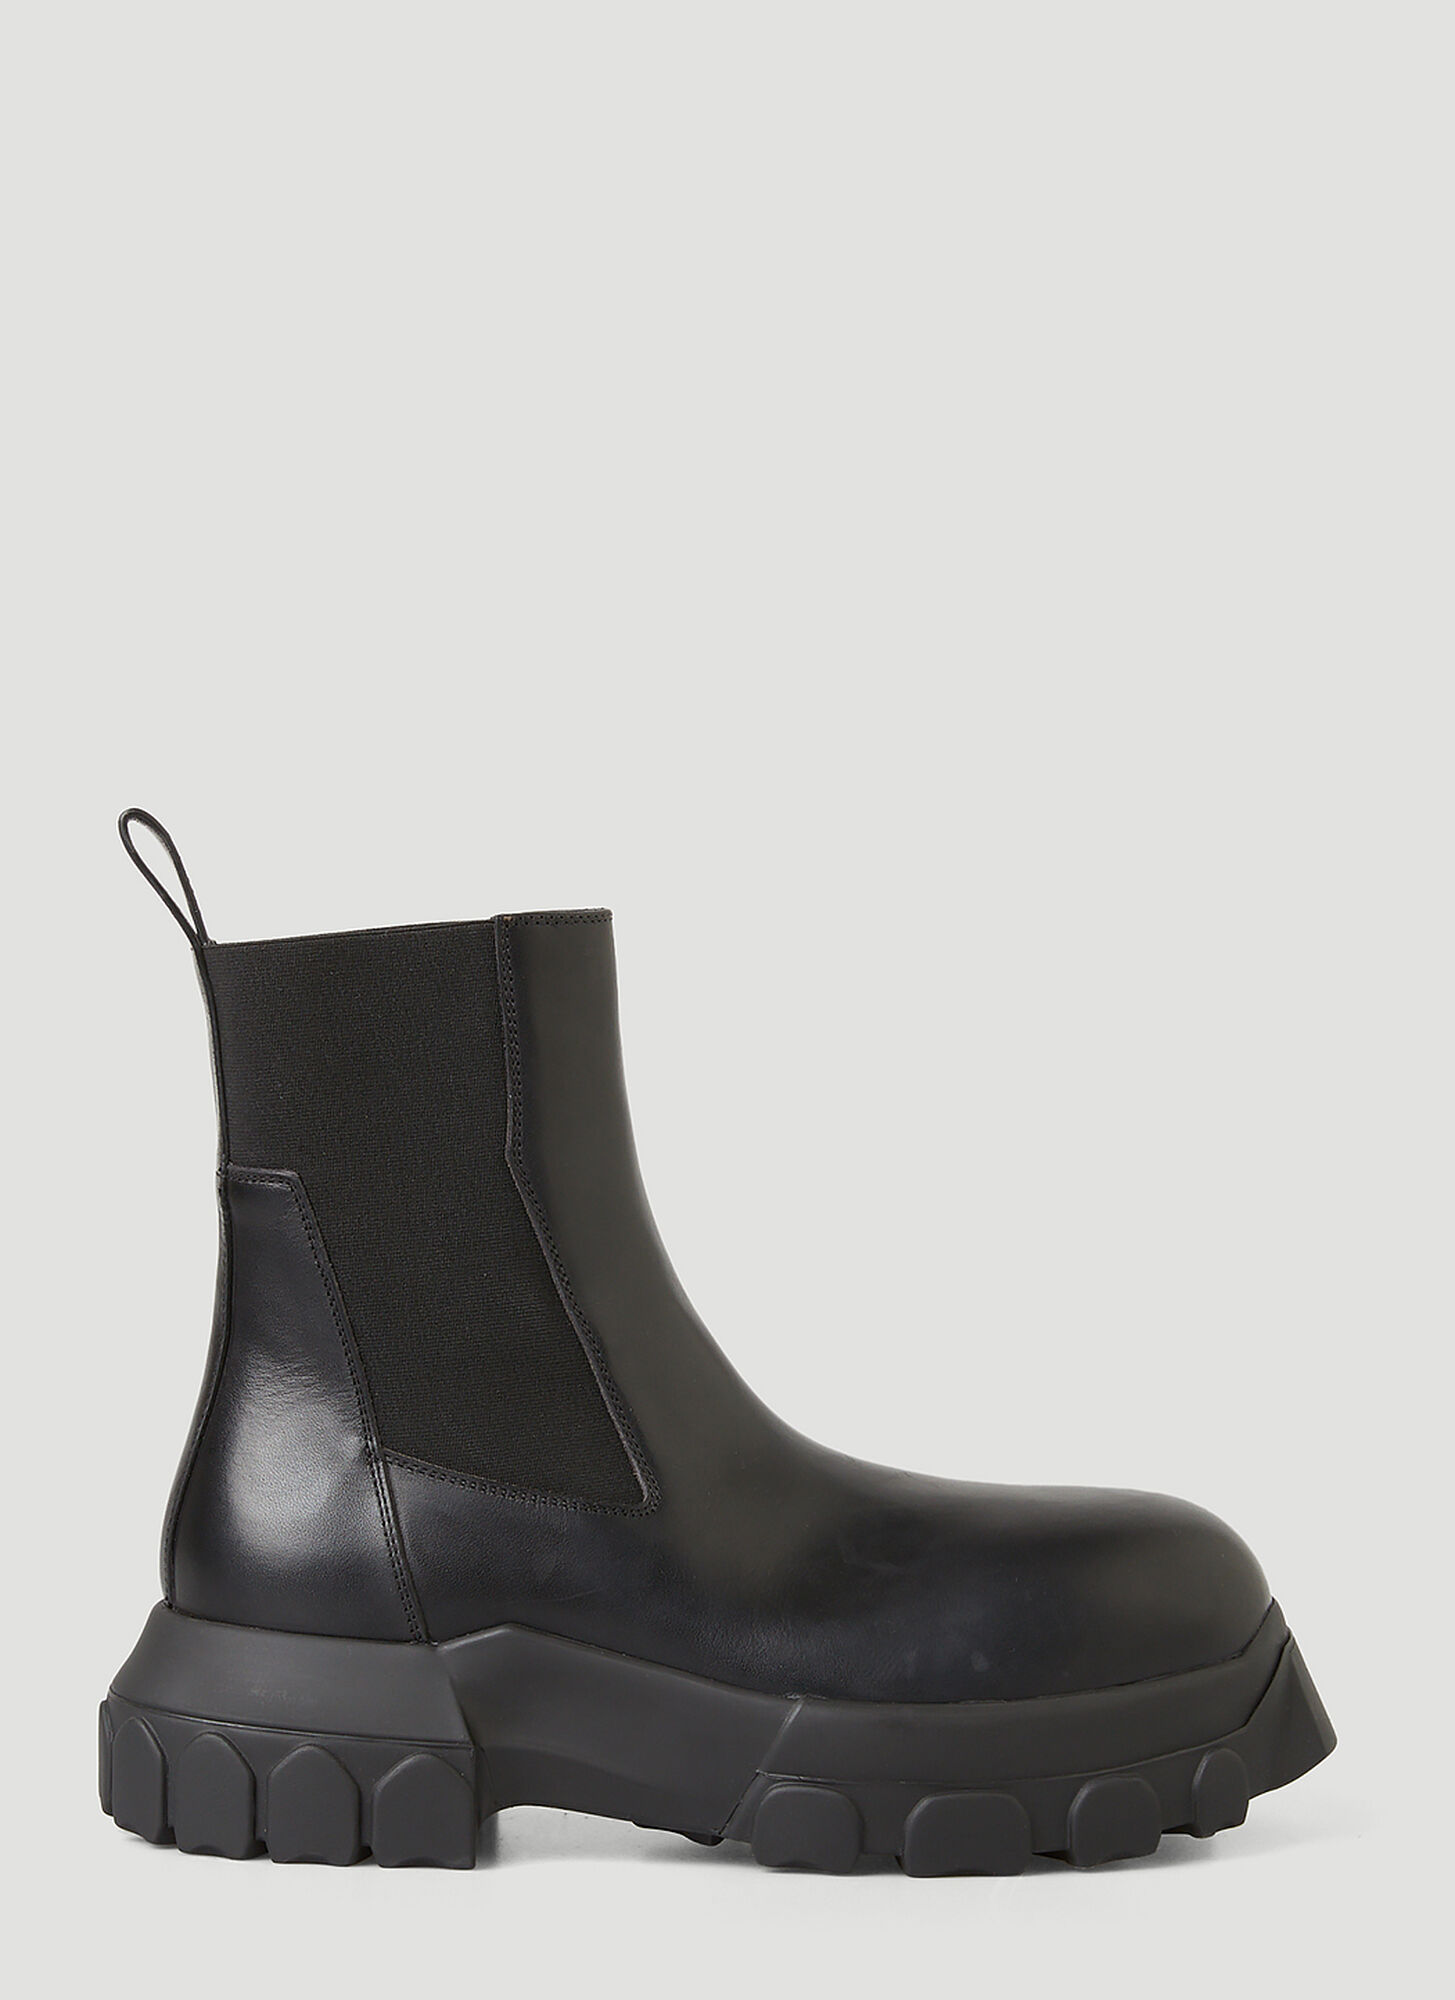 Rick Owens Bozo Tractor Stocking Boots In Black